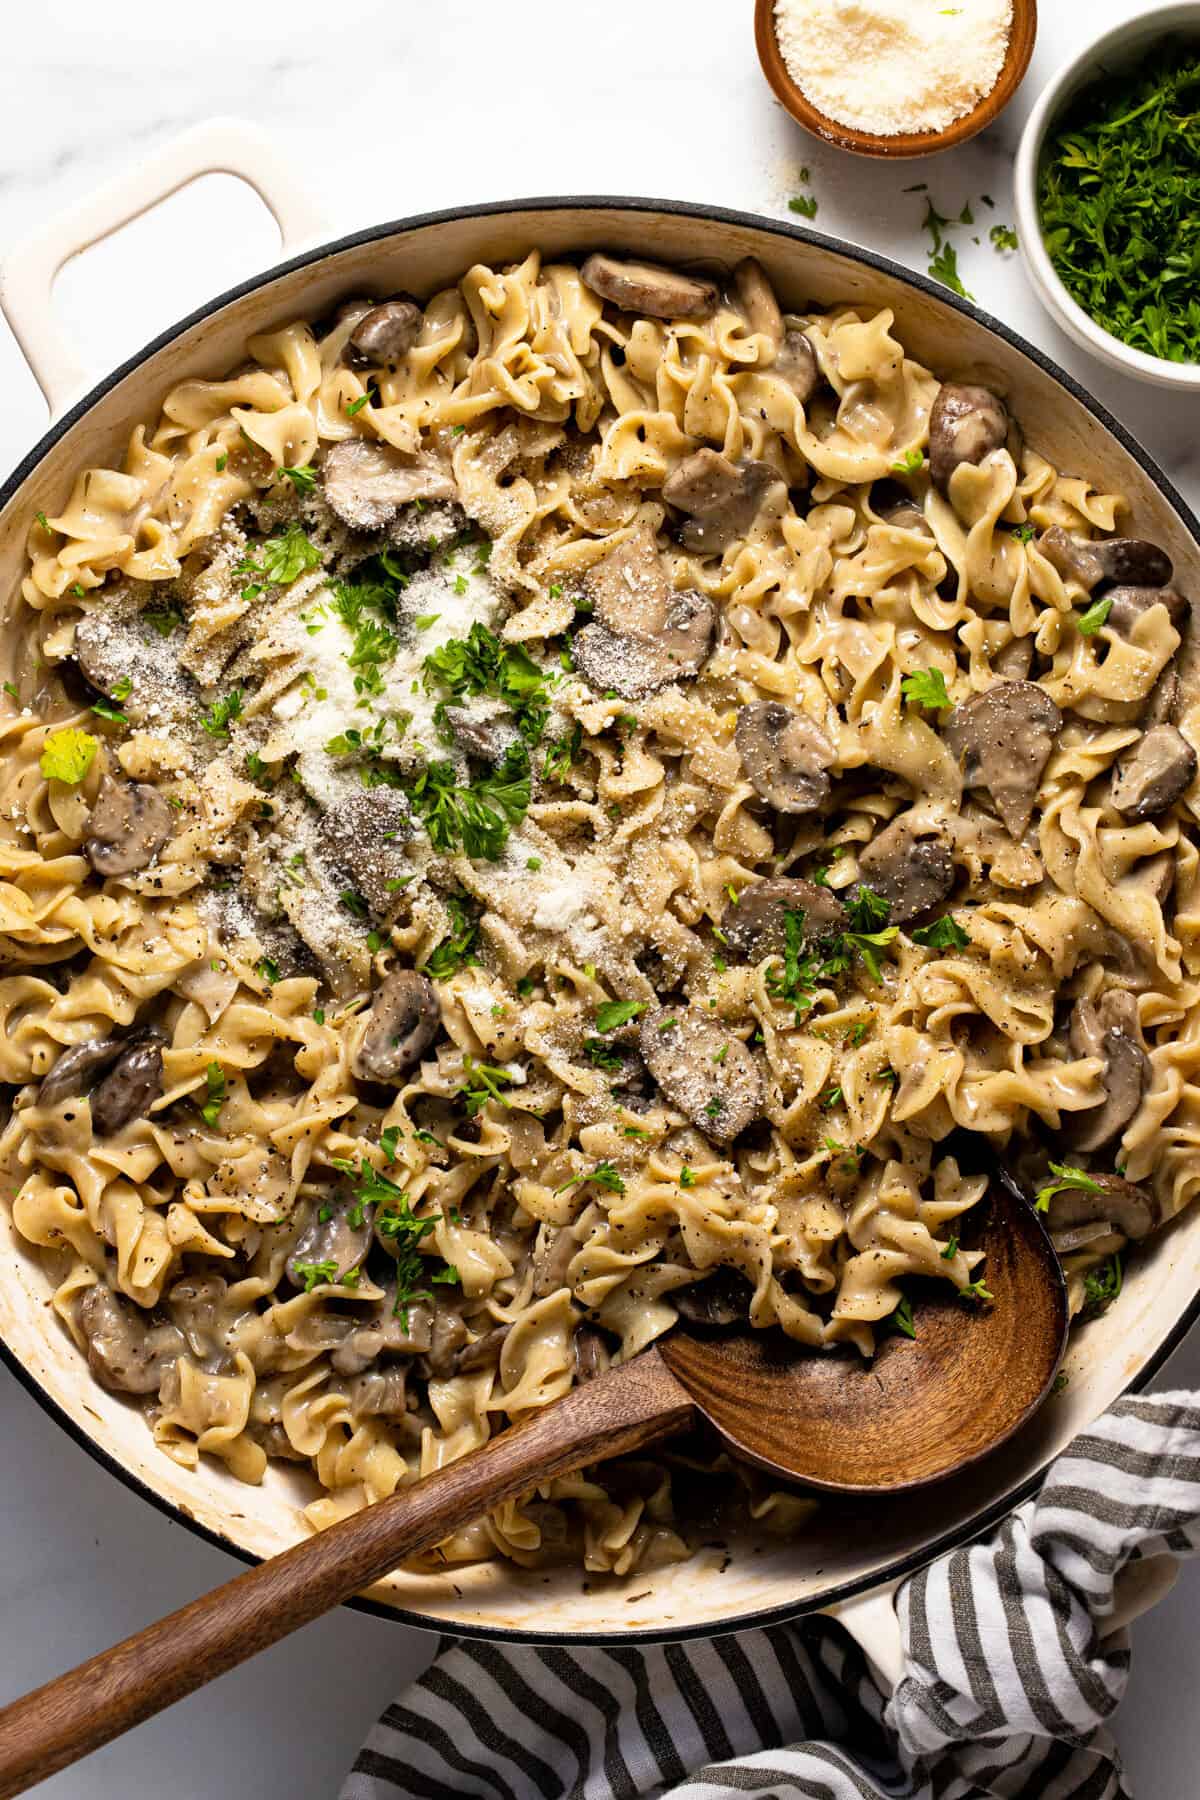 Large sauté pan filled with one pot mushroom stroganoff garnished with parsley